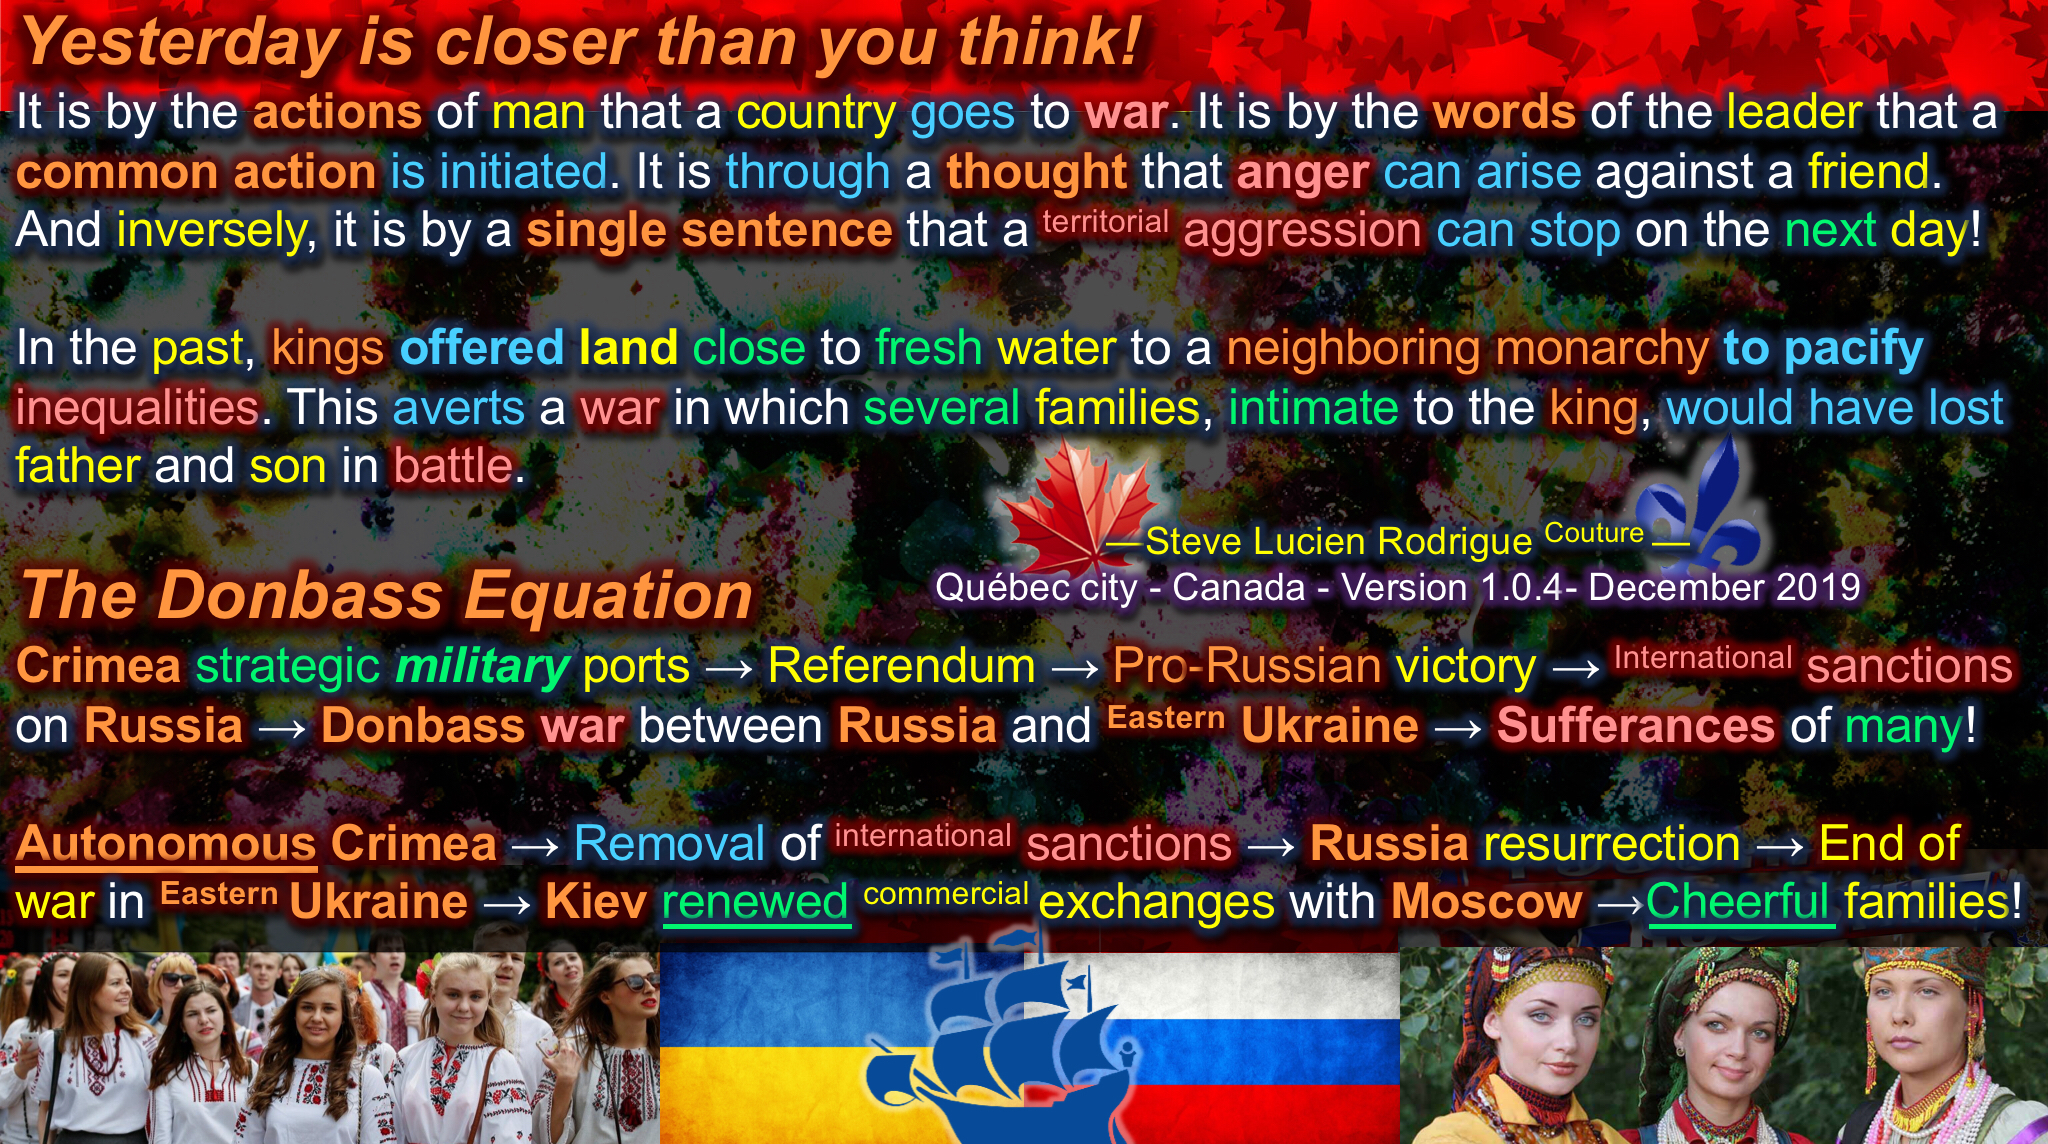 The Donbass Equation